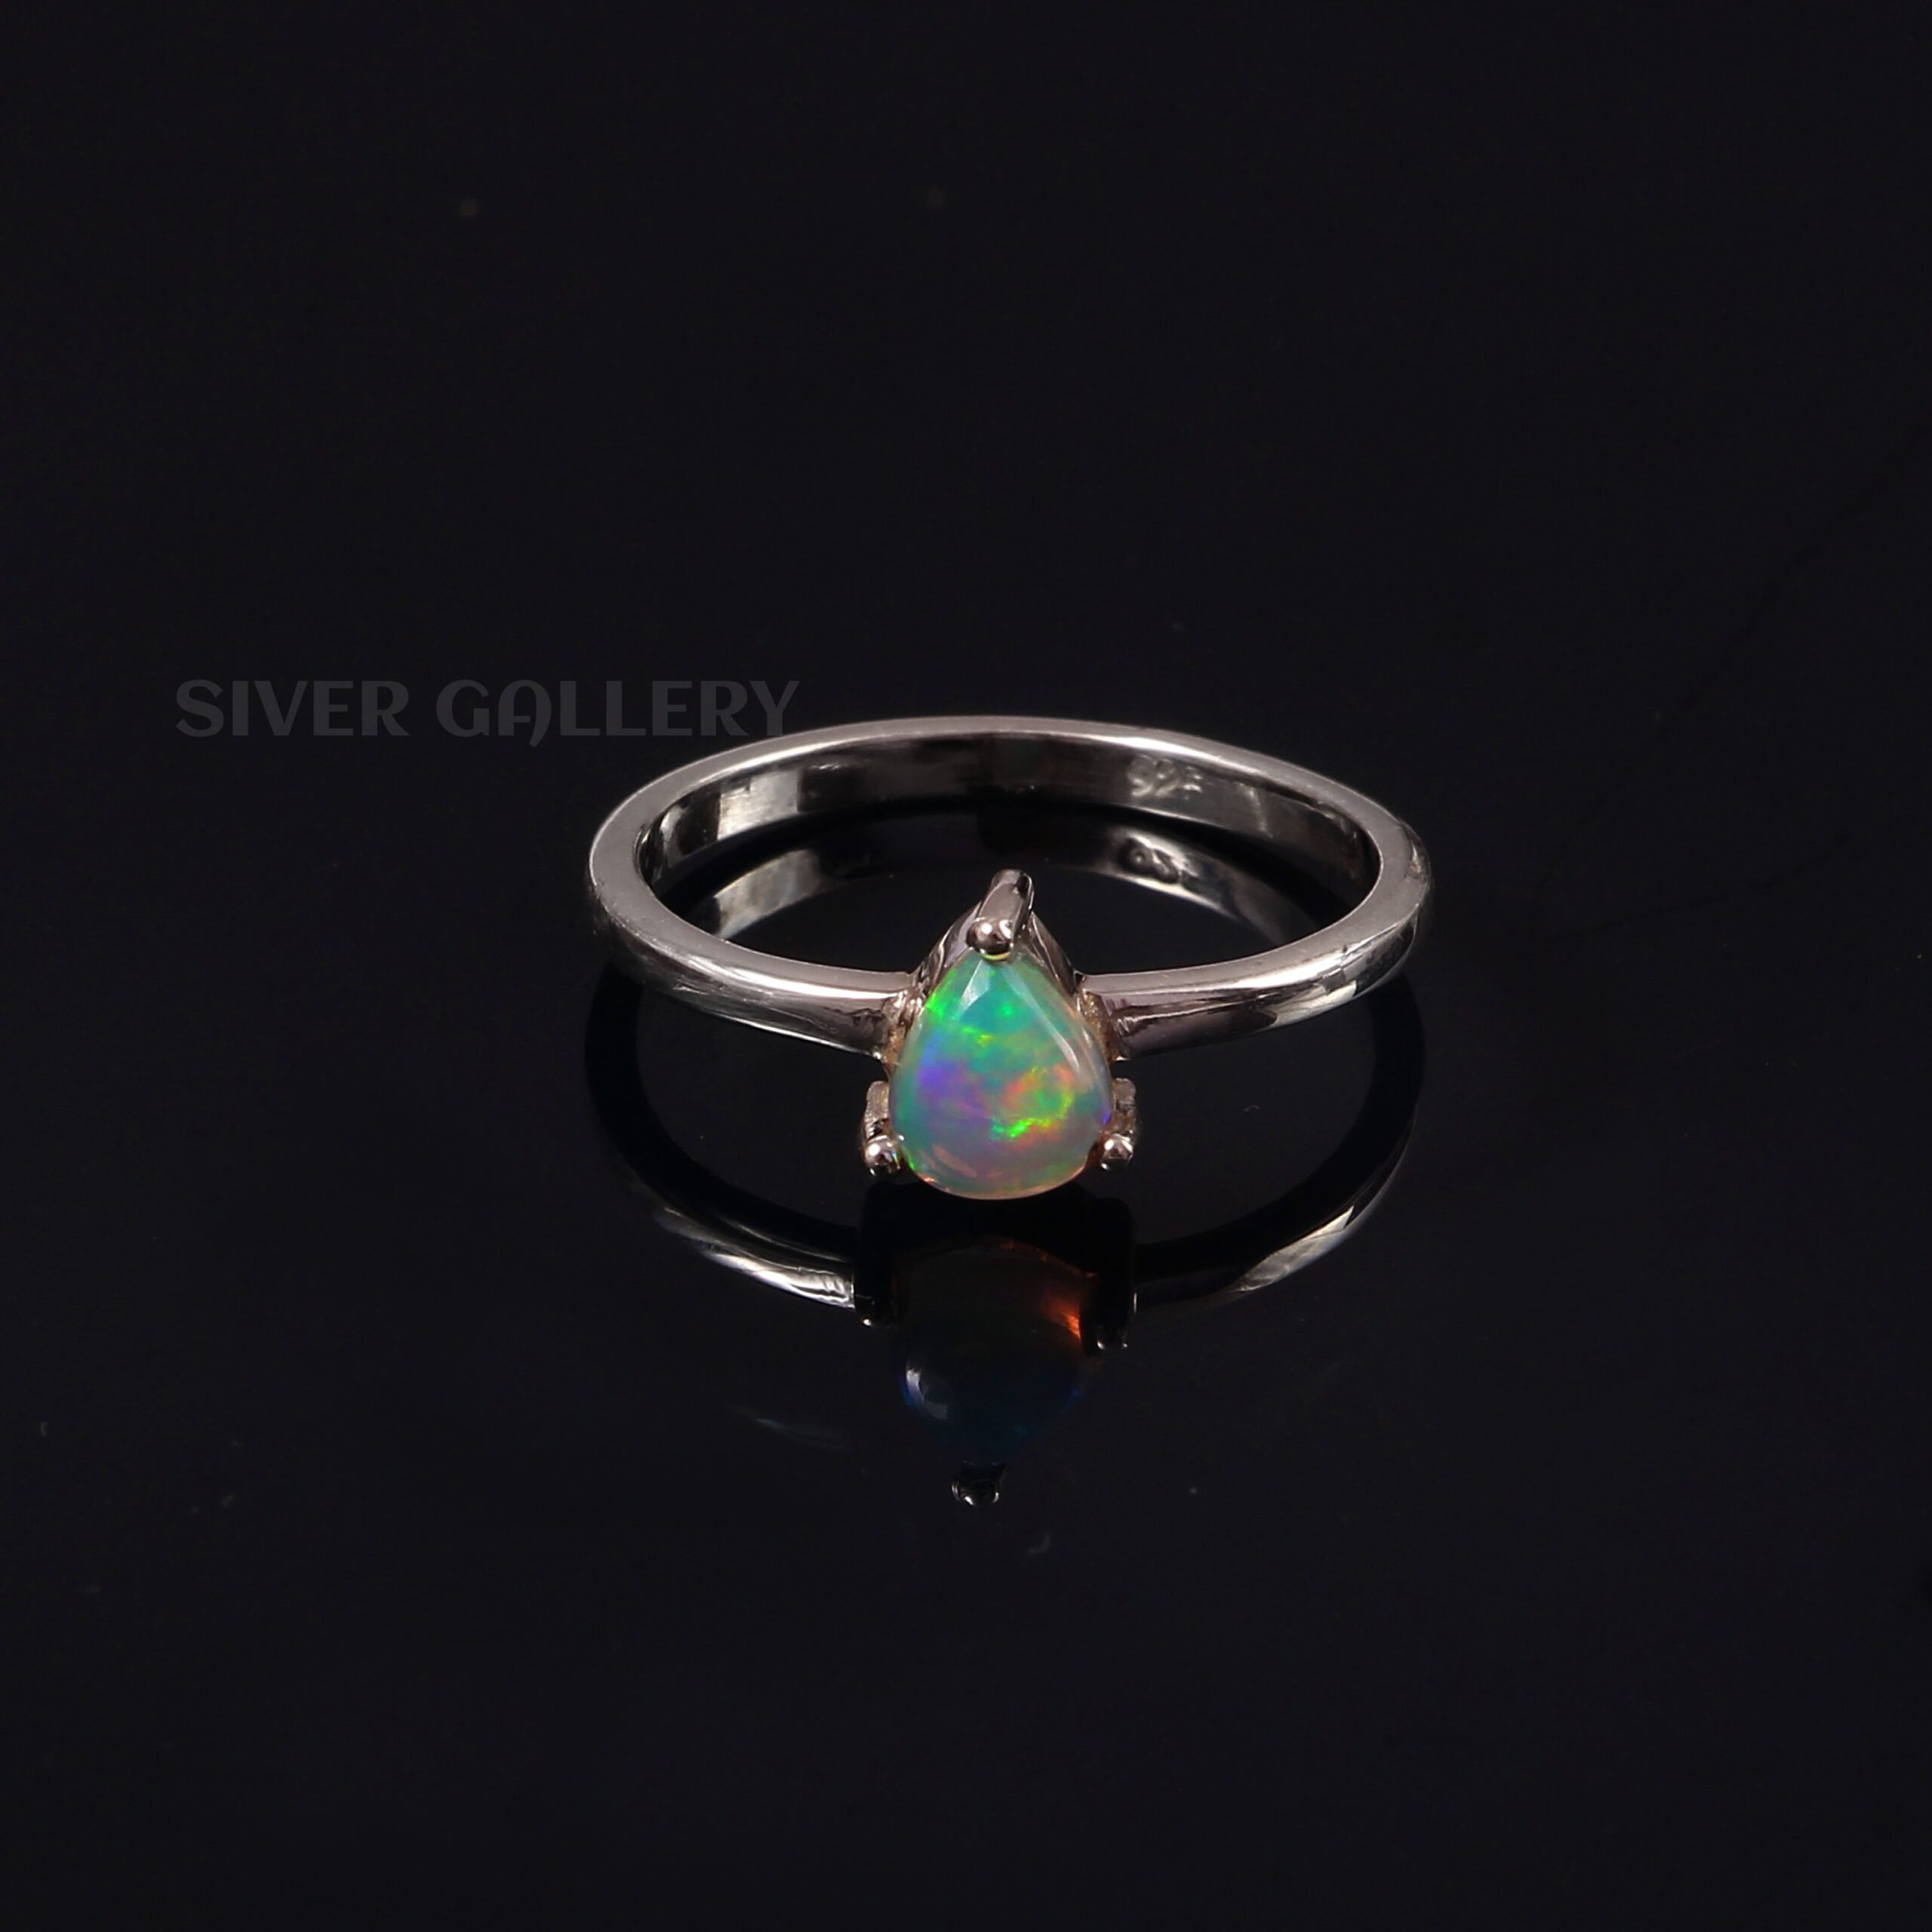 WHOLESALE 11PC 925 SOLID STERLING SILVER ETHIOPIAN OPAL RING LOT  1 o691 